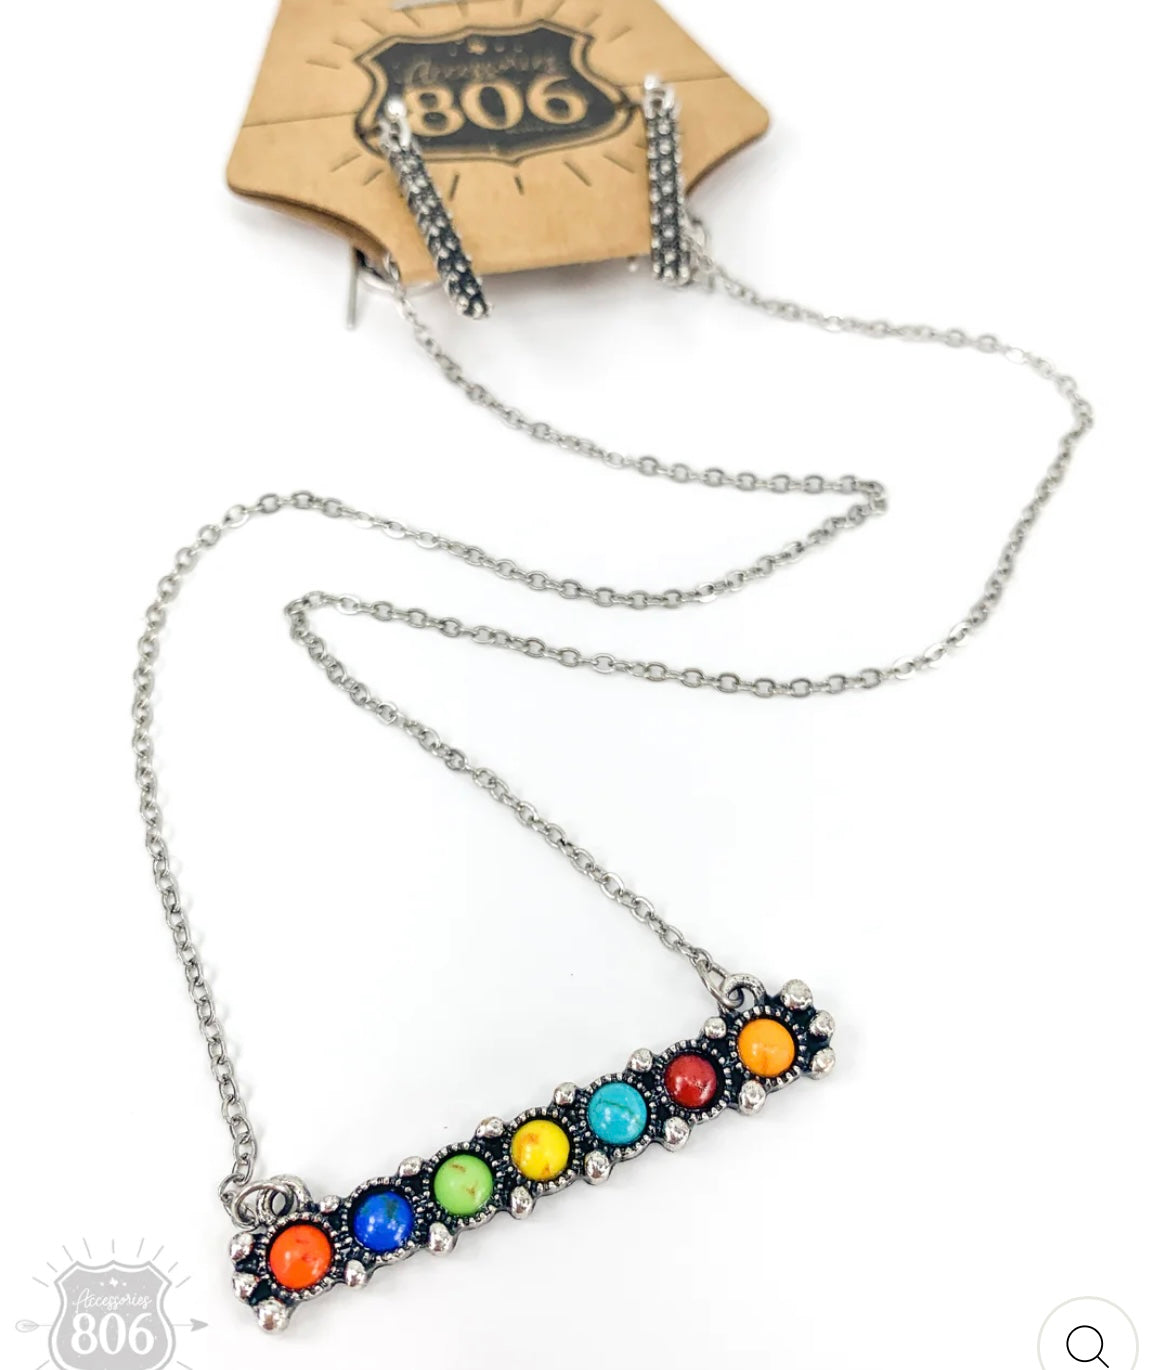 Bar necklace with multi-colored stones and silver dangle earrings